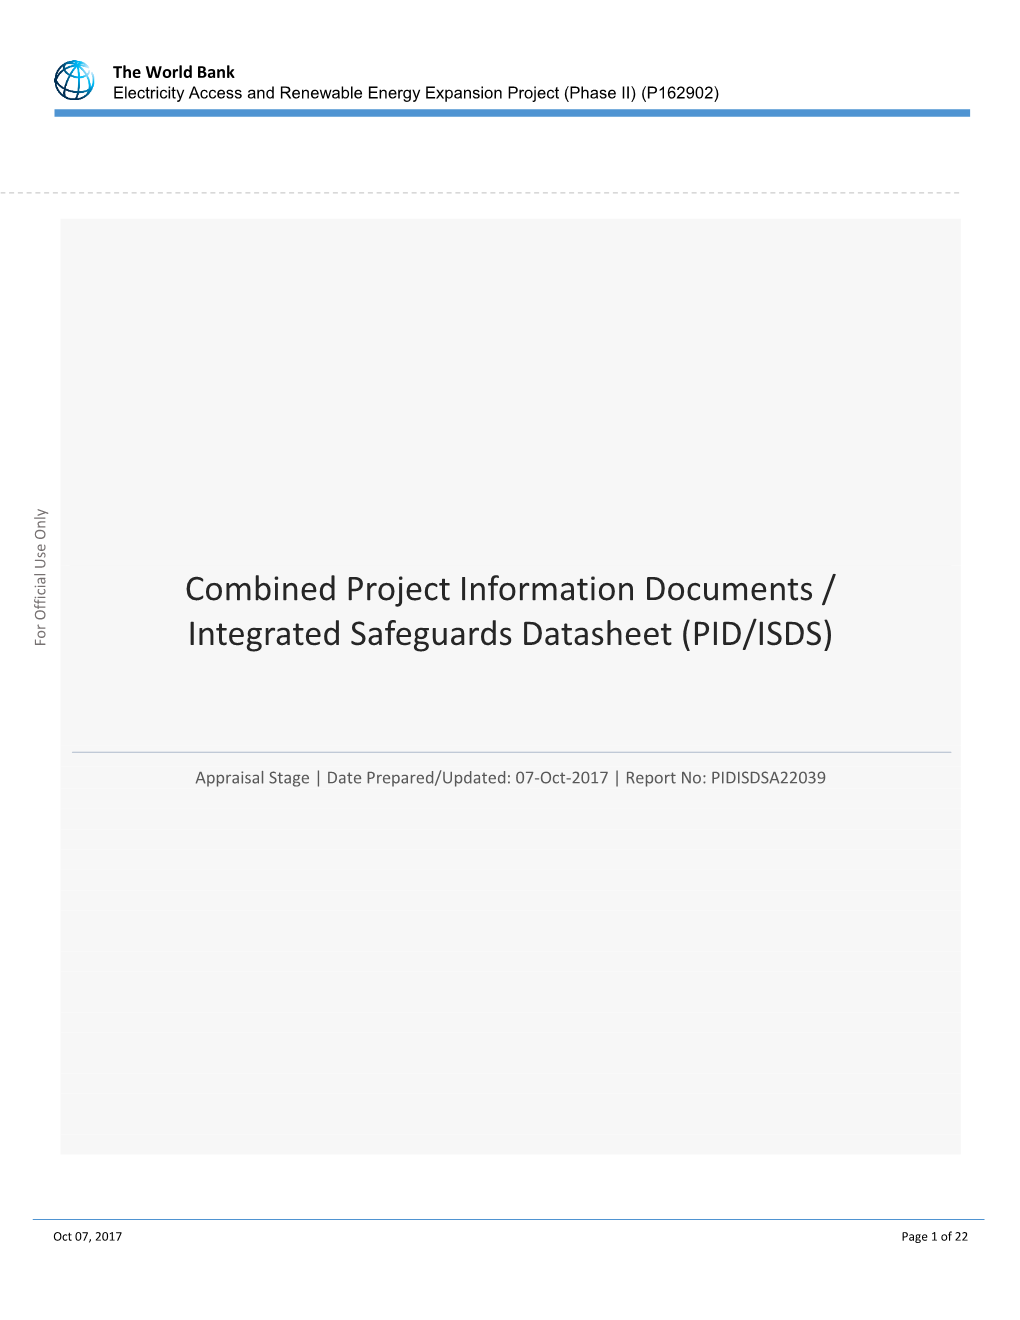 Project Information Document-Integrated Safeguards